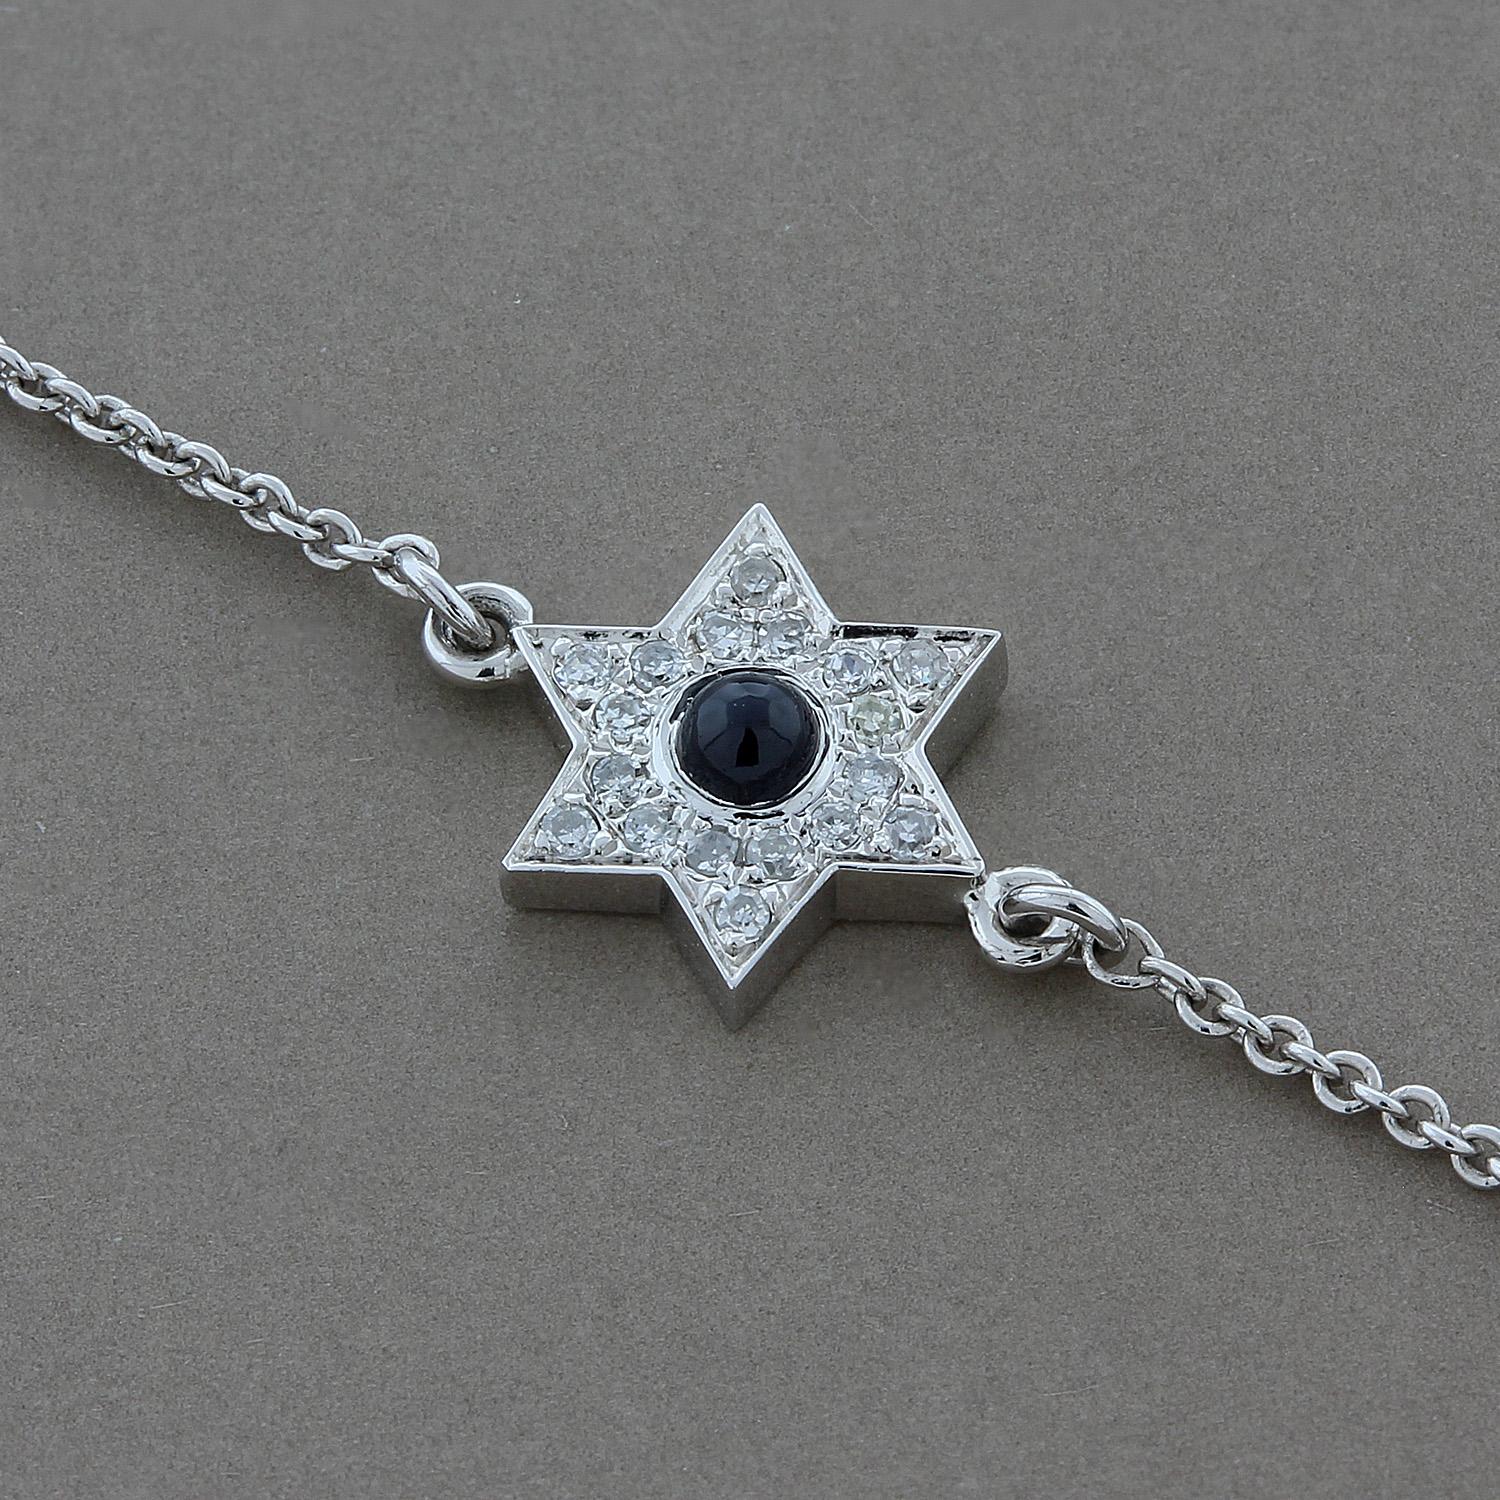 A star with a single round cabochon blue sapphire centered around 0.05 carats of pave set diamonds. Pave set in 14K white gold, this bracelet is a great everyday piece that can be worn alone or stacked.

Adjustable chain with sizing loops to fits